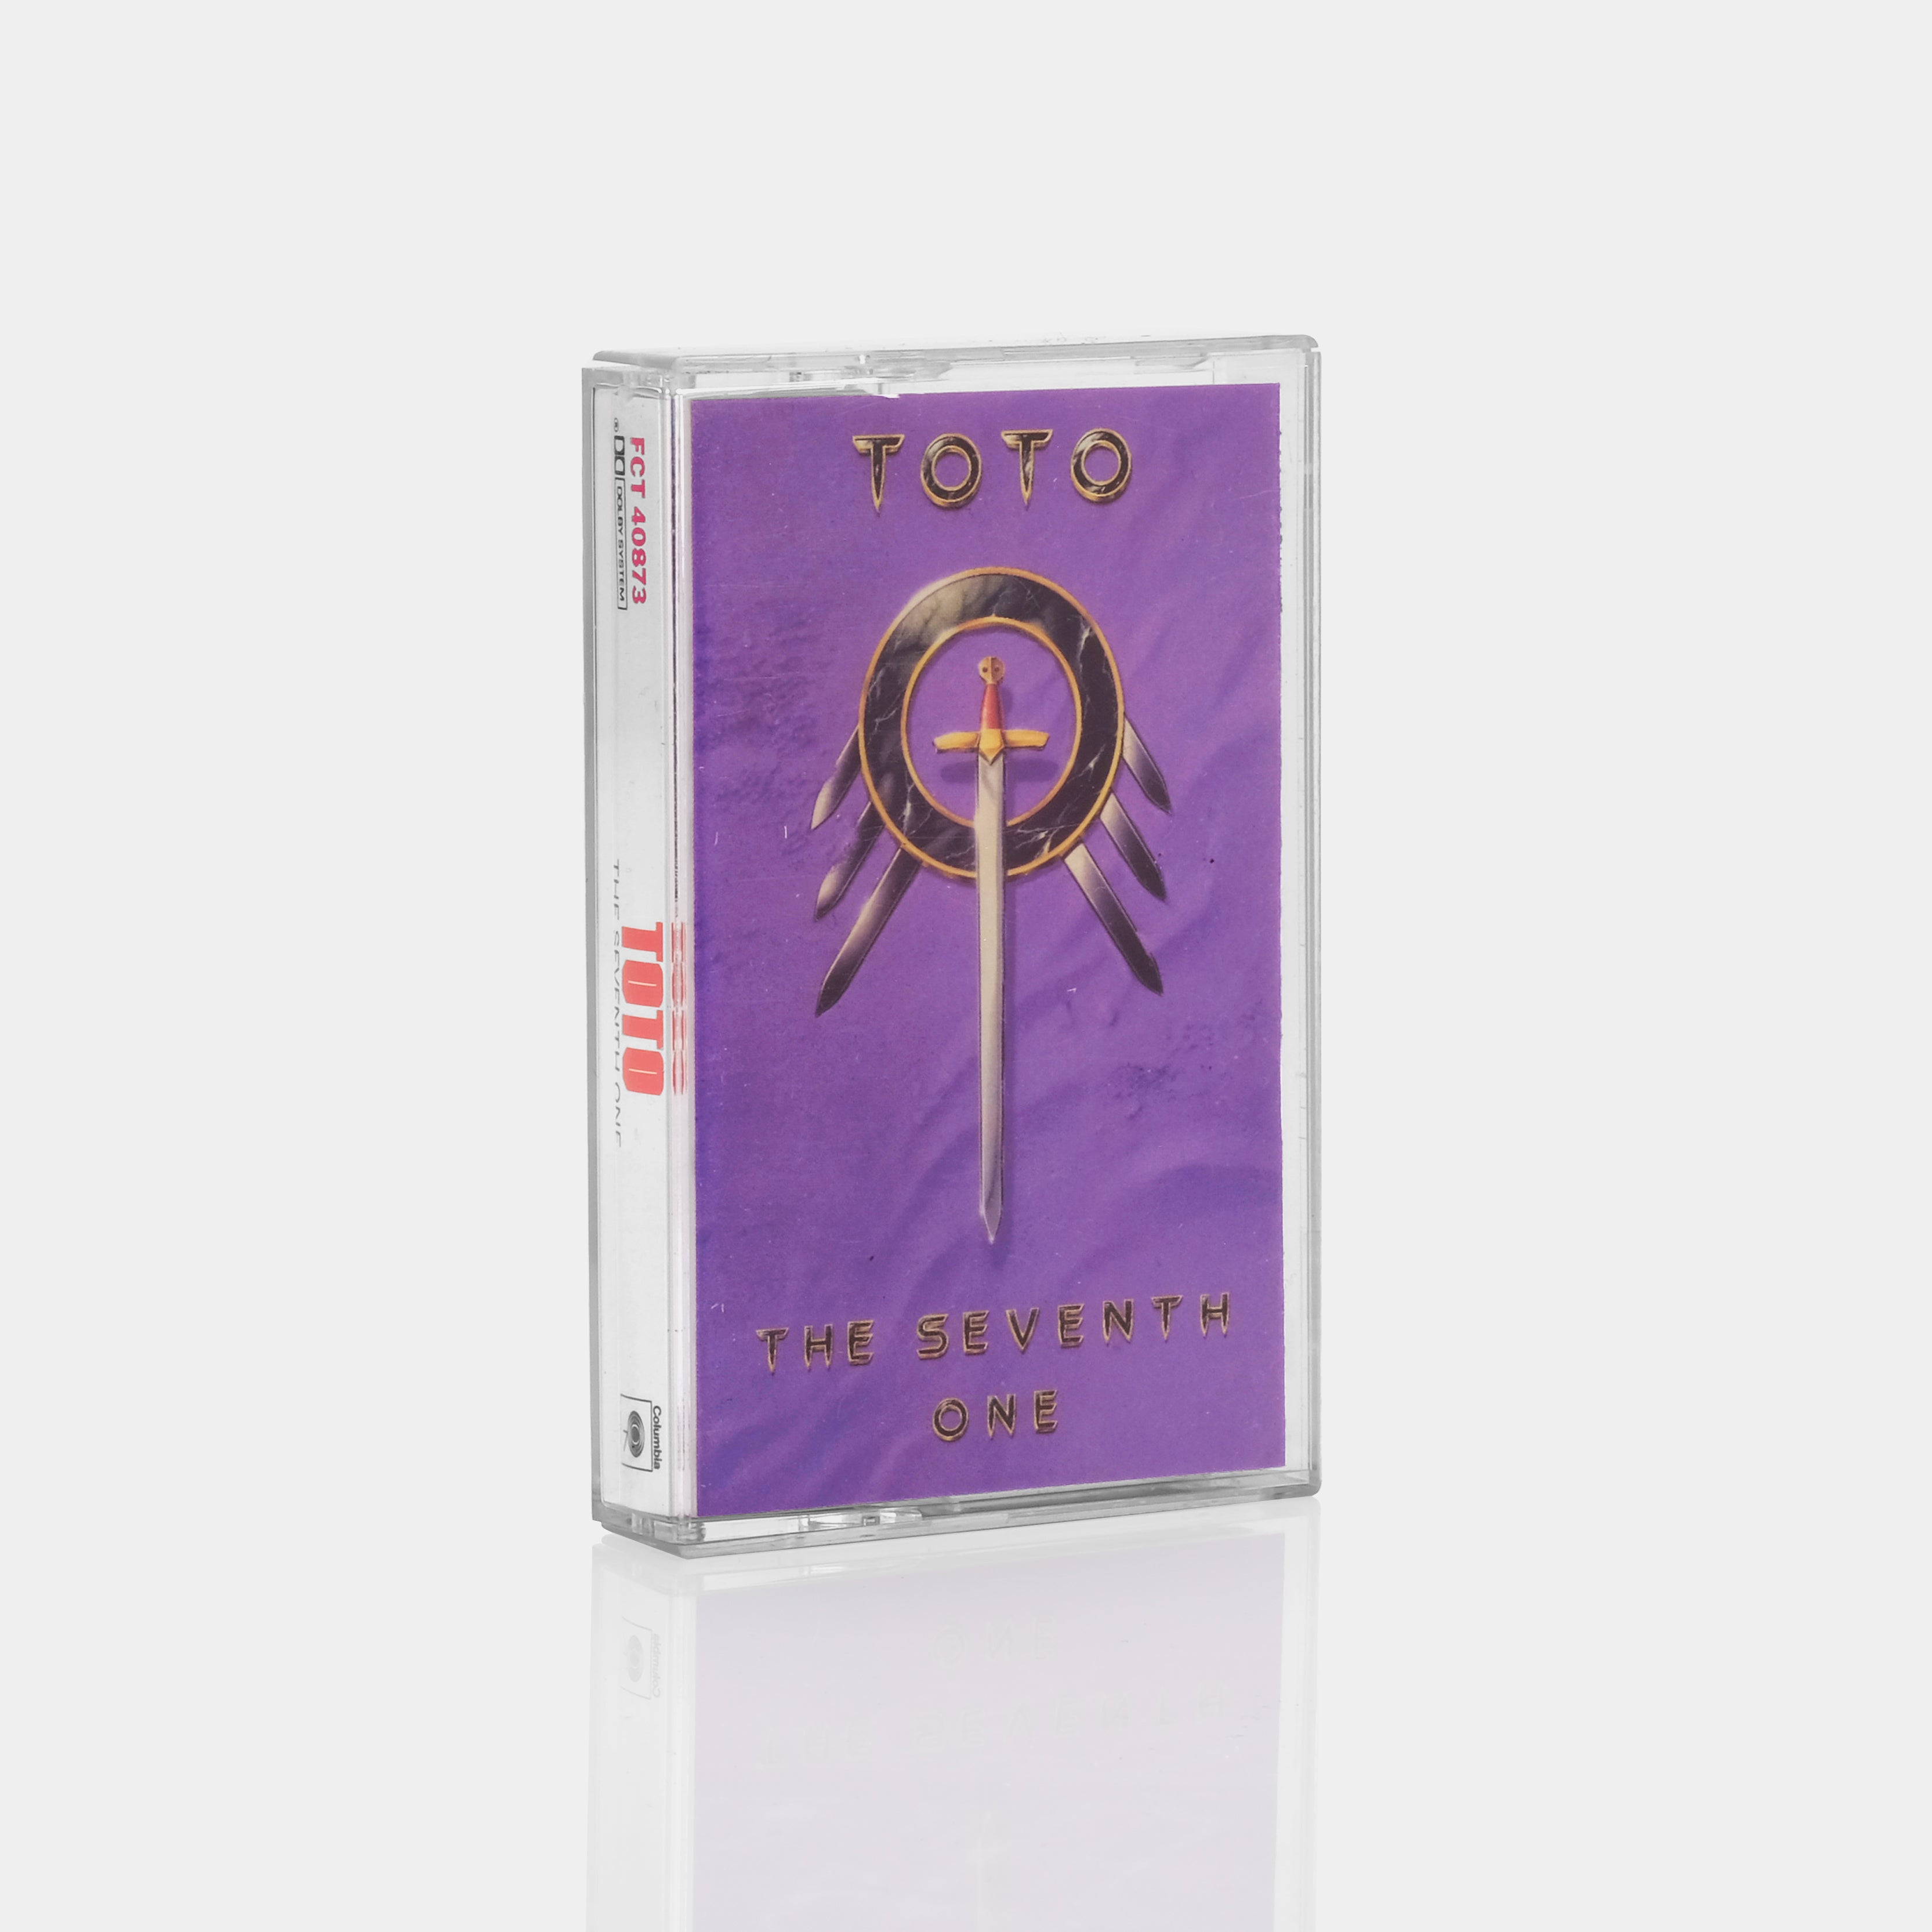 TOTO - The Seventh One Cassette Tape